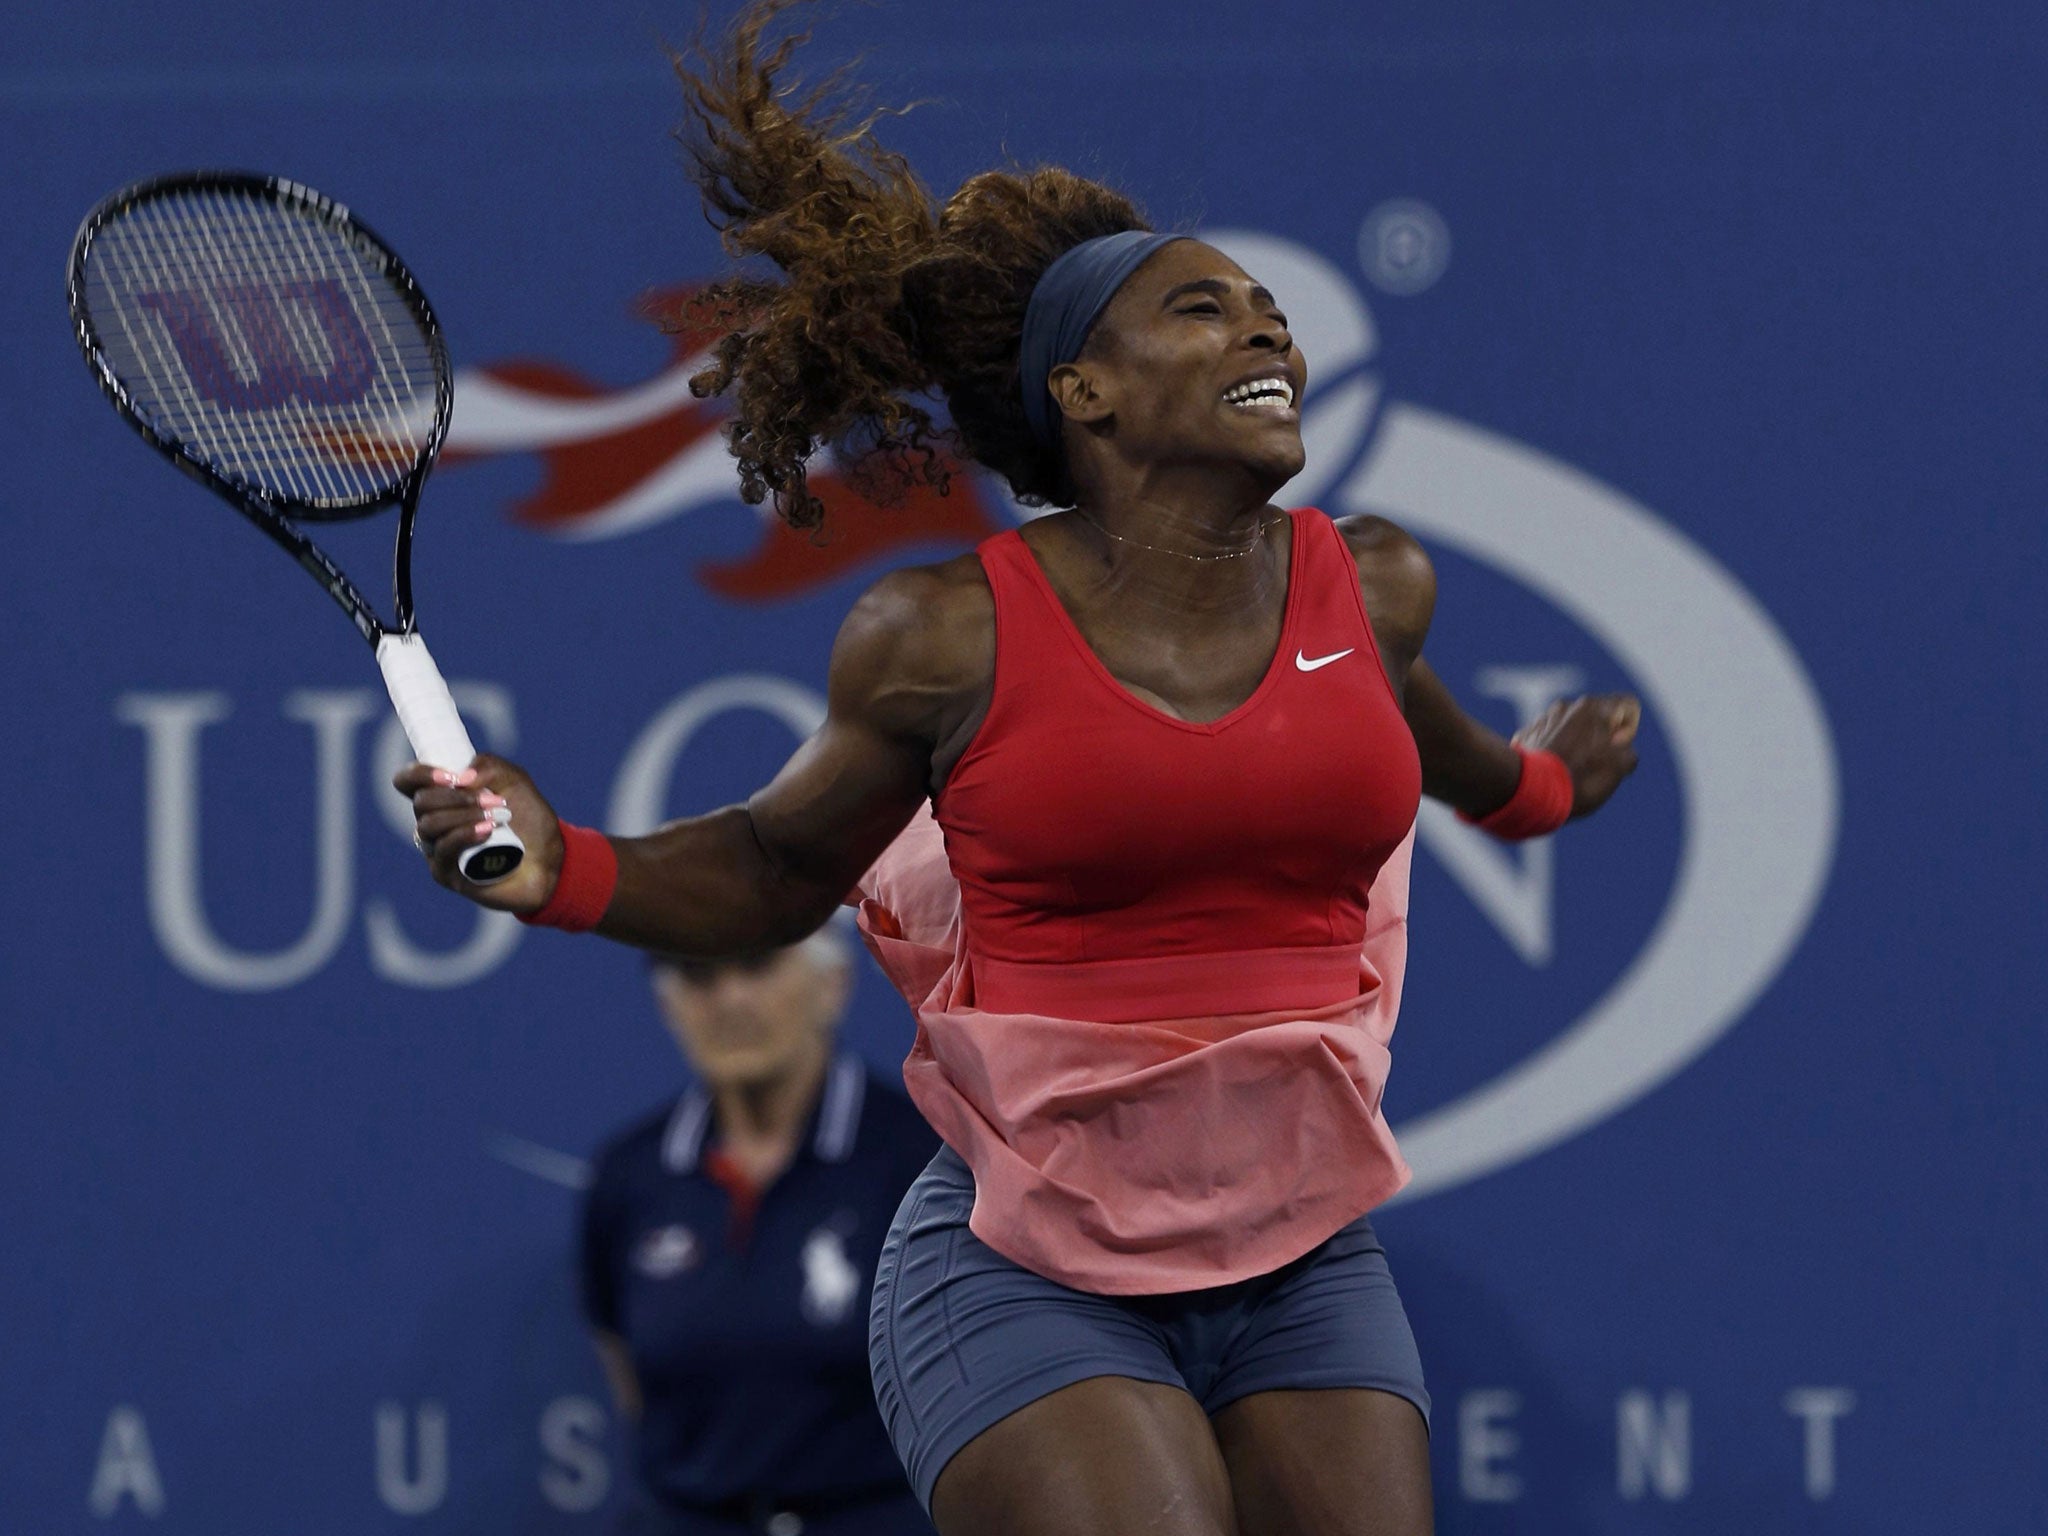 It is 14 years since Serena Williams won her first Grand Slam title but the 31-year-old is showing no signs of slowing down. Williams claimed the 17th Grand Slam title of her career and her fifth US Open trophy when she beat Victoria Azarenka 7-5, 6-7, 6-